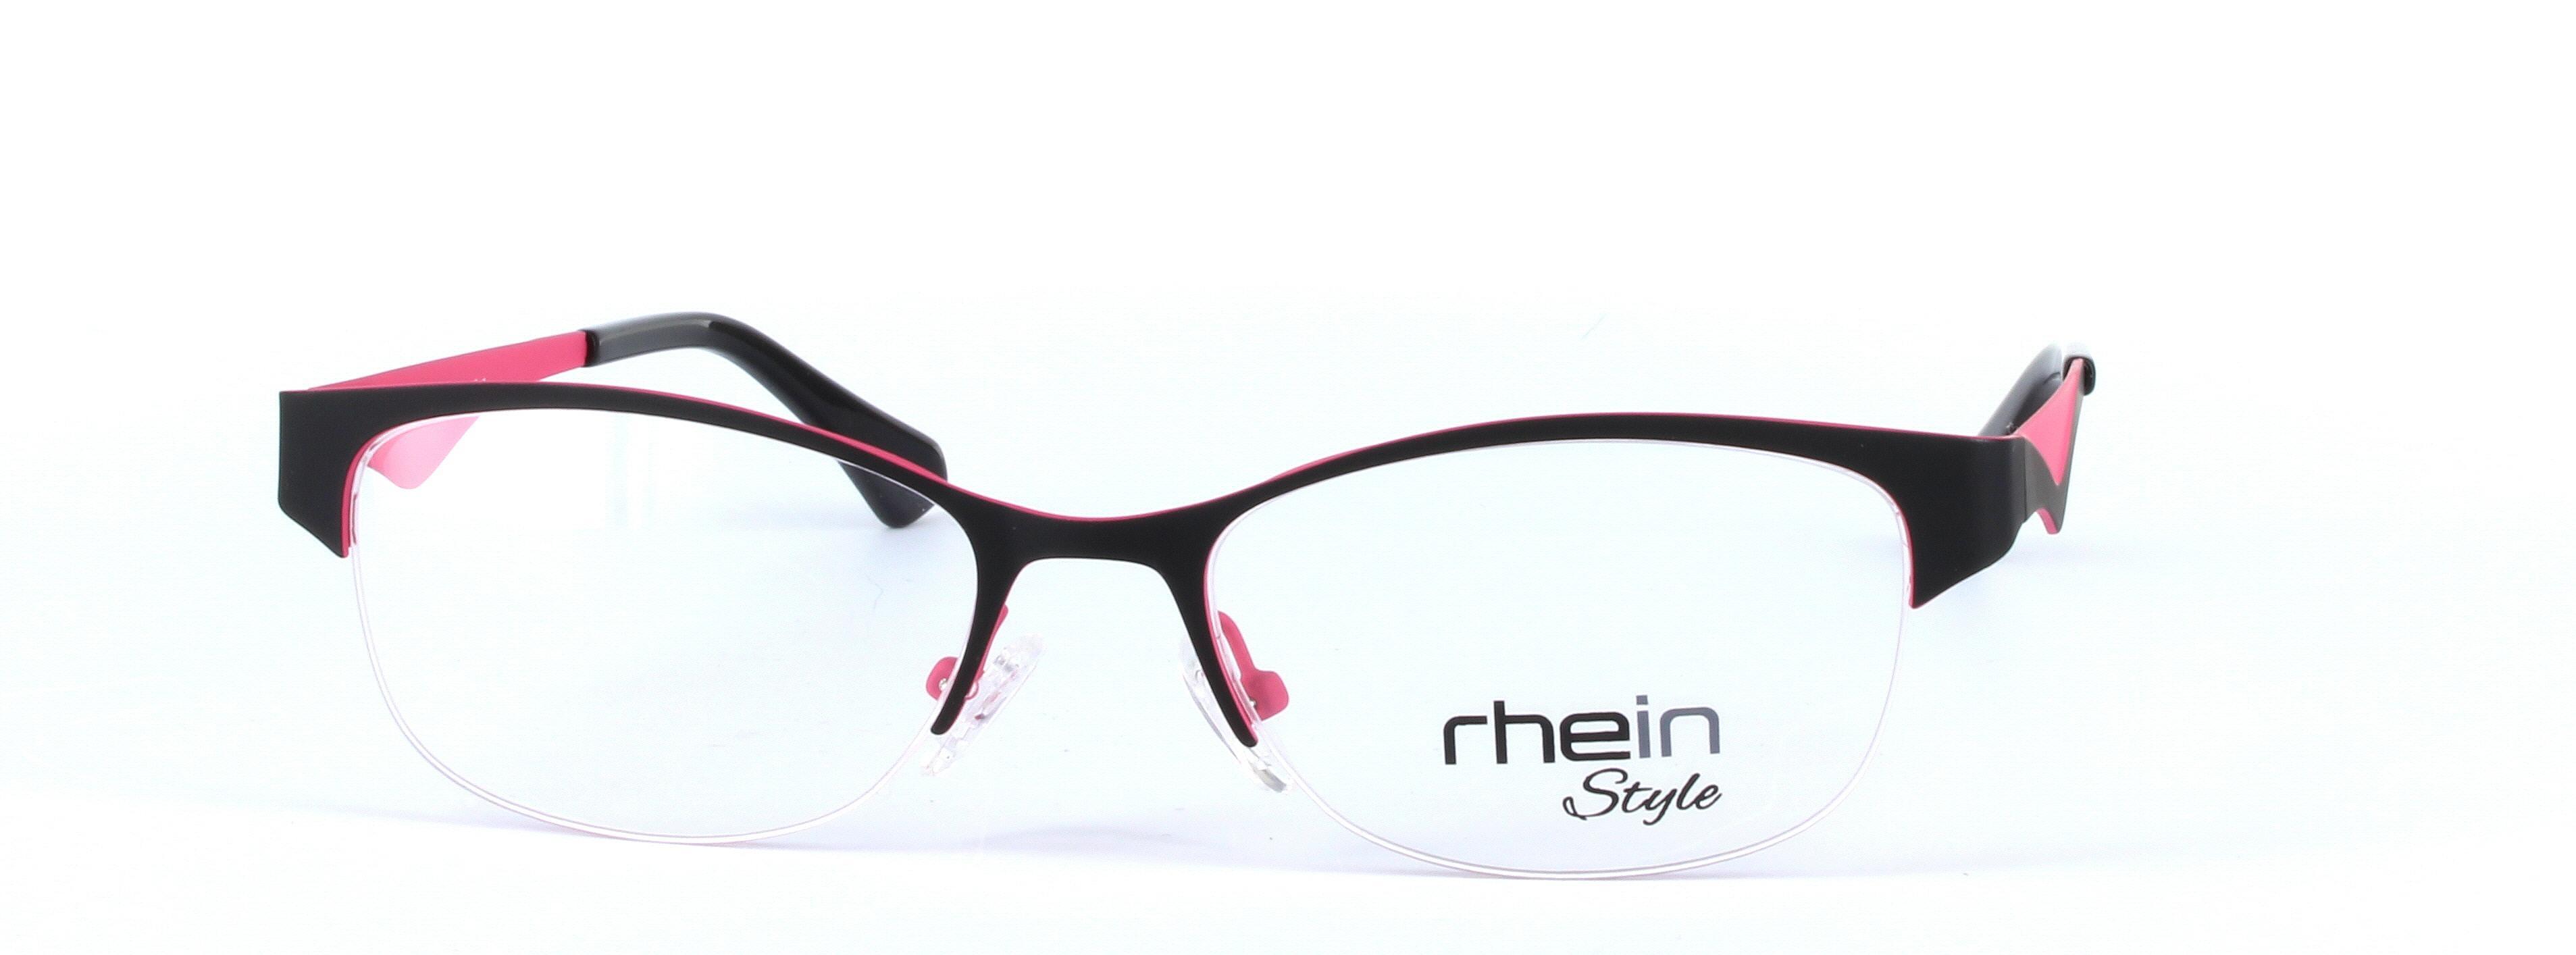 Kelly Black and Pink Semi Rimless Oval Rectangular Metal Glasses - Image View 5